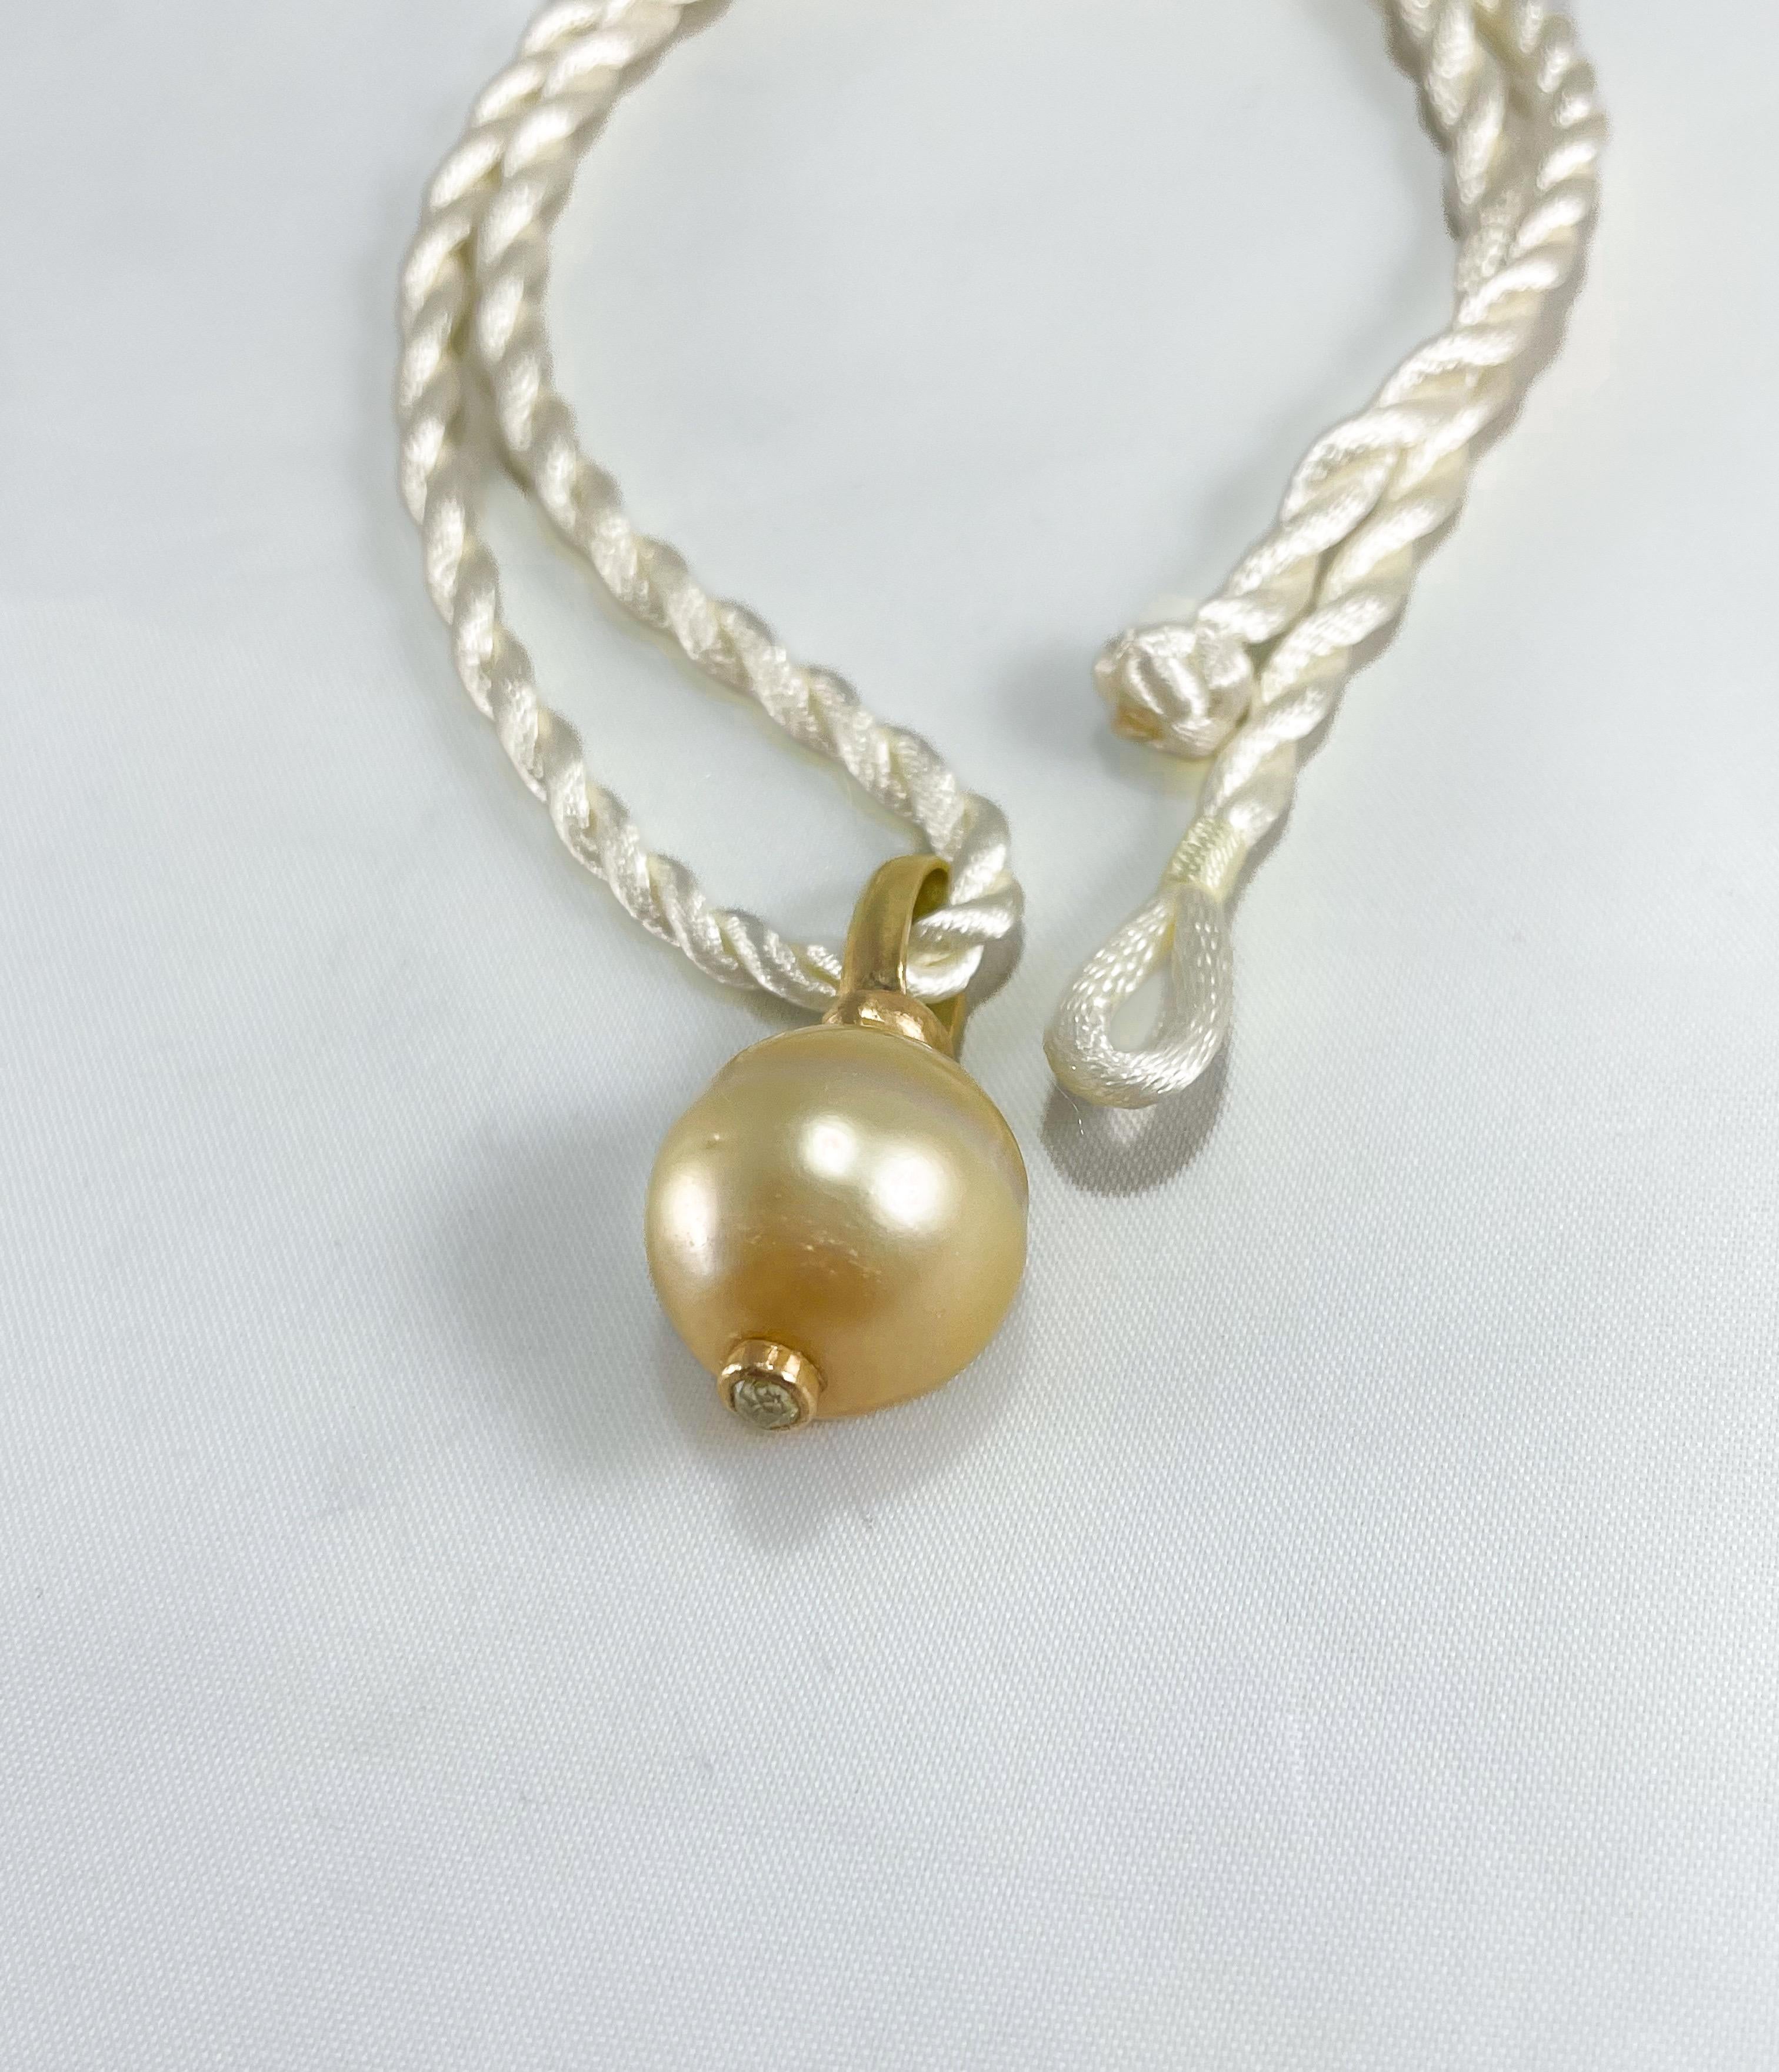 Cream cultured pearl choker pendant. Hand crafted. Large 17mm cultured cream pearl. It is a stunner on a long 18K gold bail on one side and punctuated by a rose cut yellow diamond on the other.  

The pearl pendant will arrive with silk cord as in